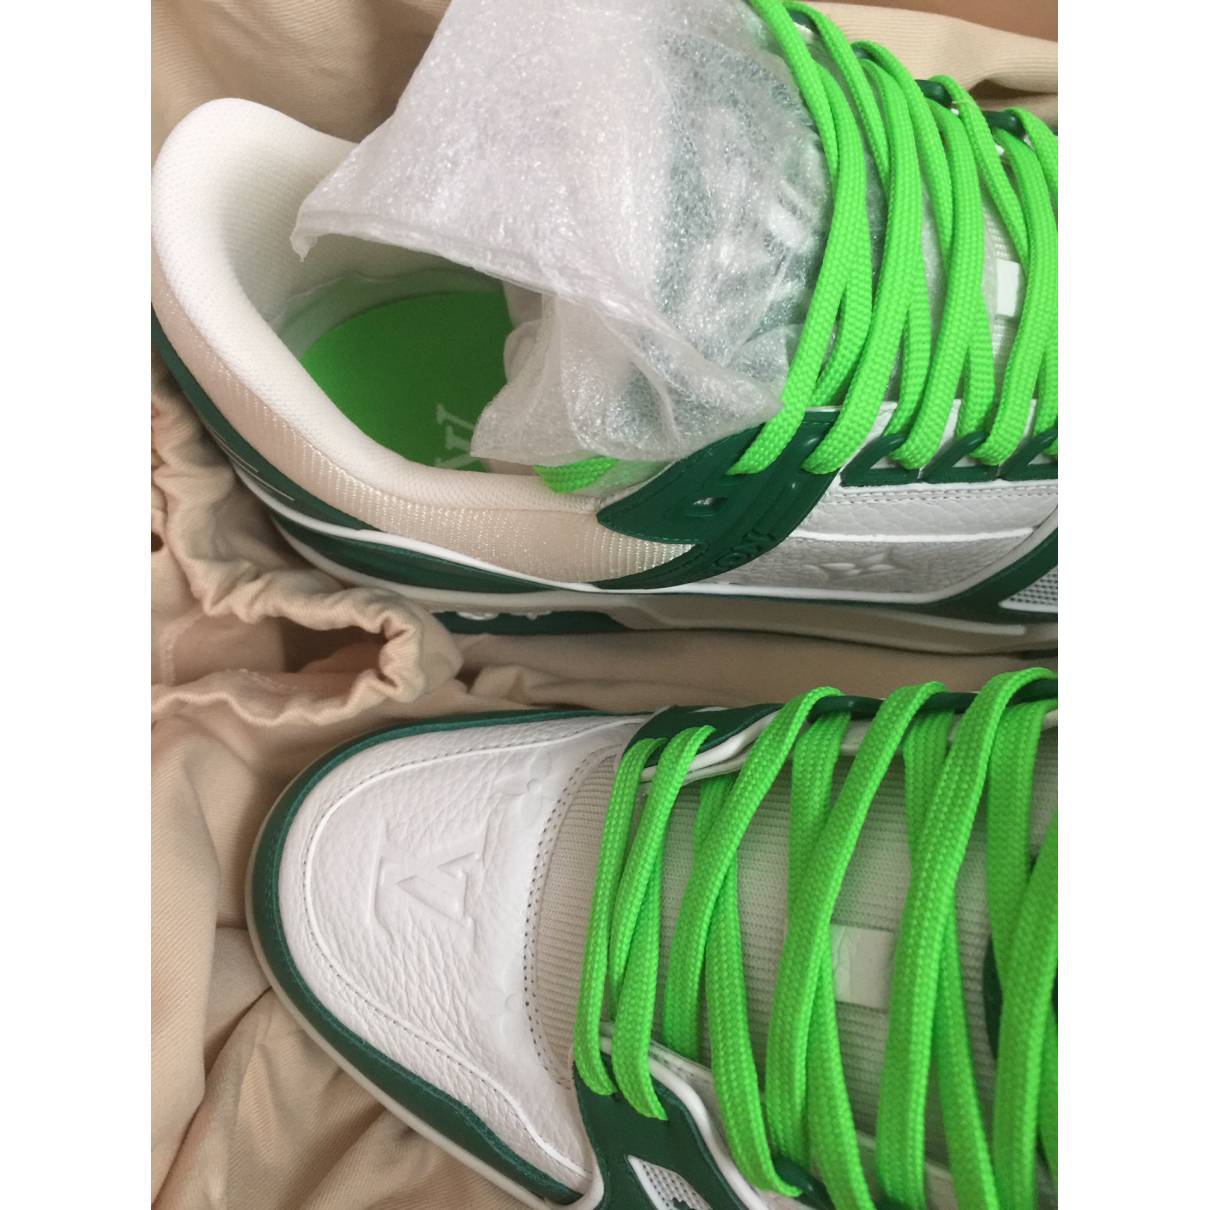 Lv trainer leather high trainers Louis Vuitton Green size 9 UK in